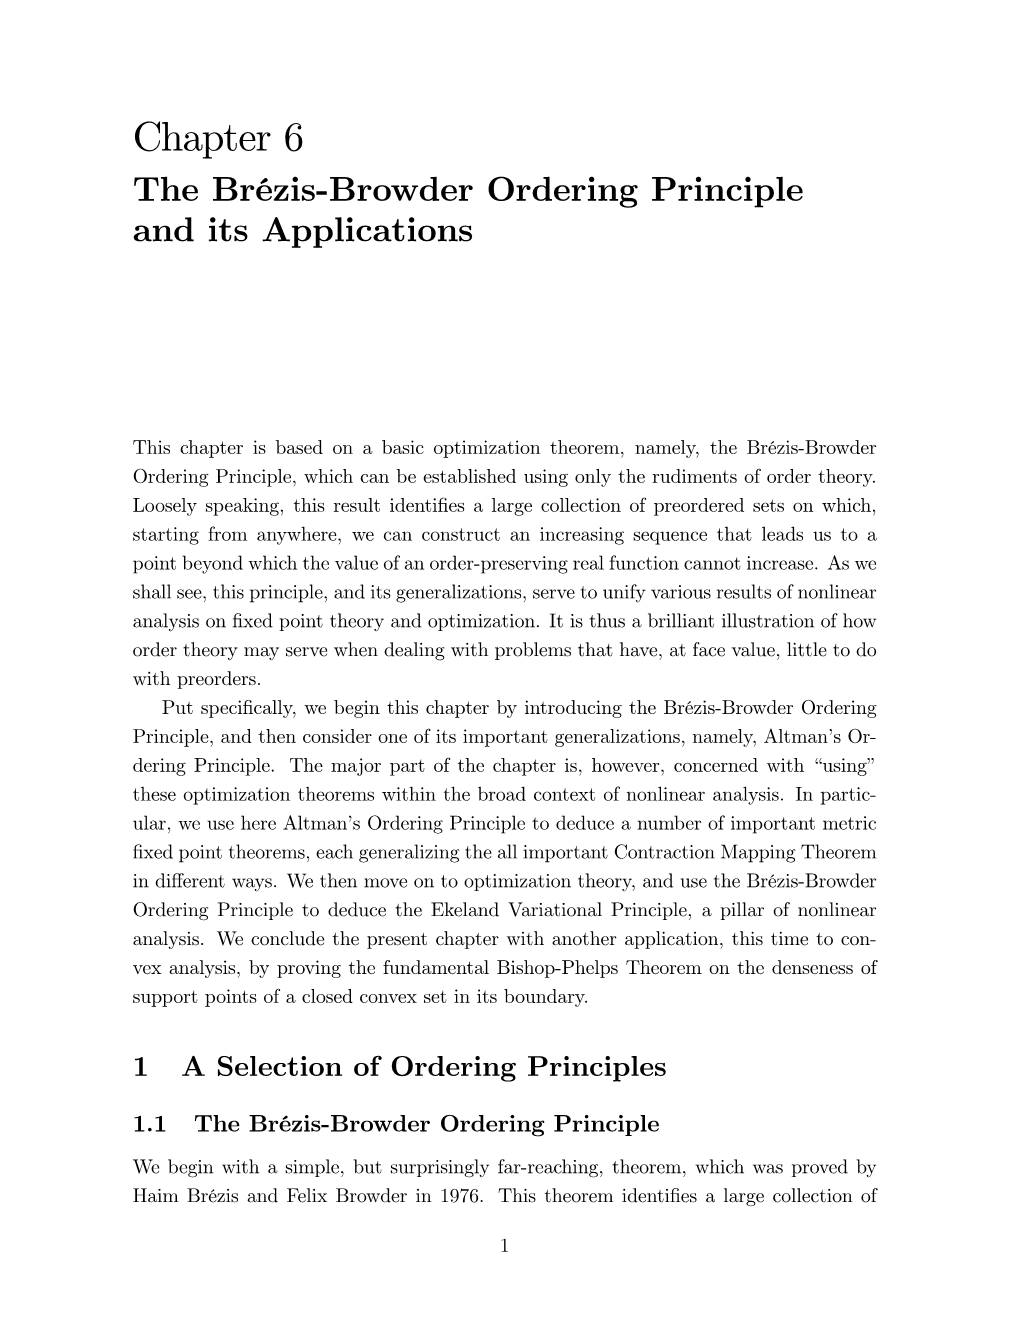 Chapter 6 the Brézis-Browder Ordering Principle and Its Applications